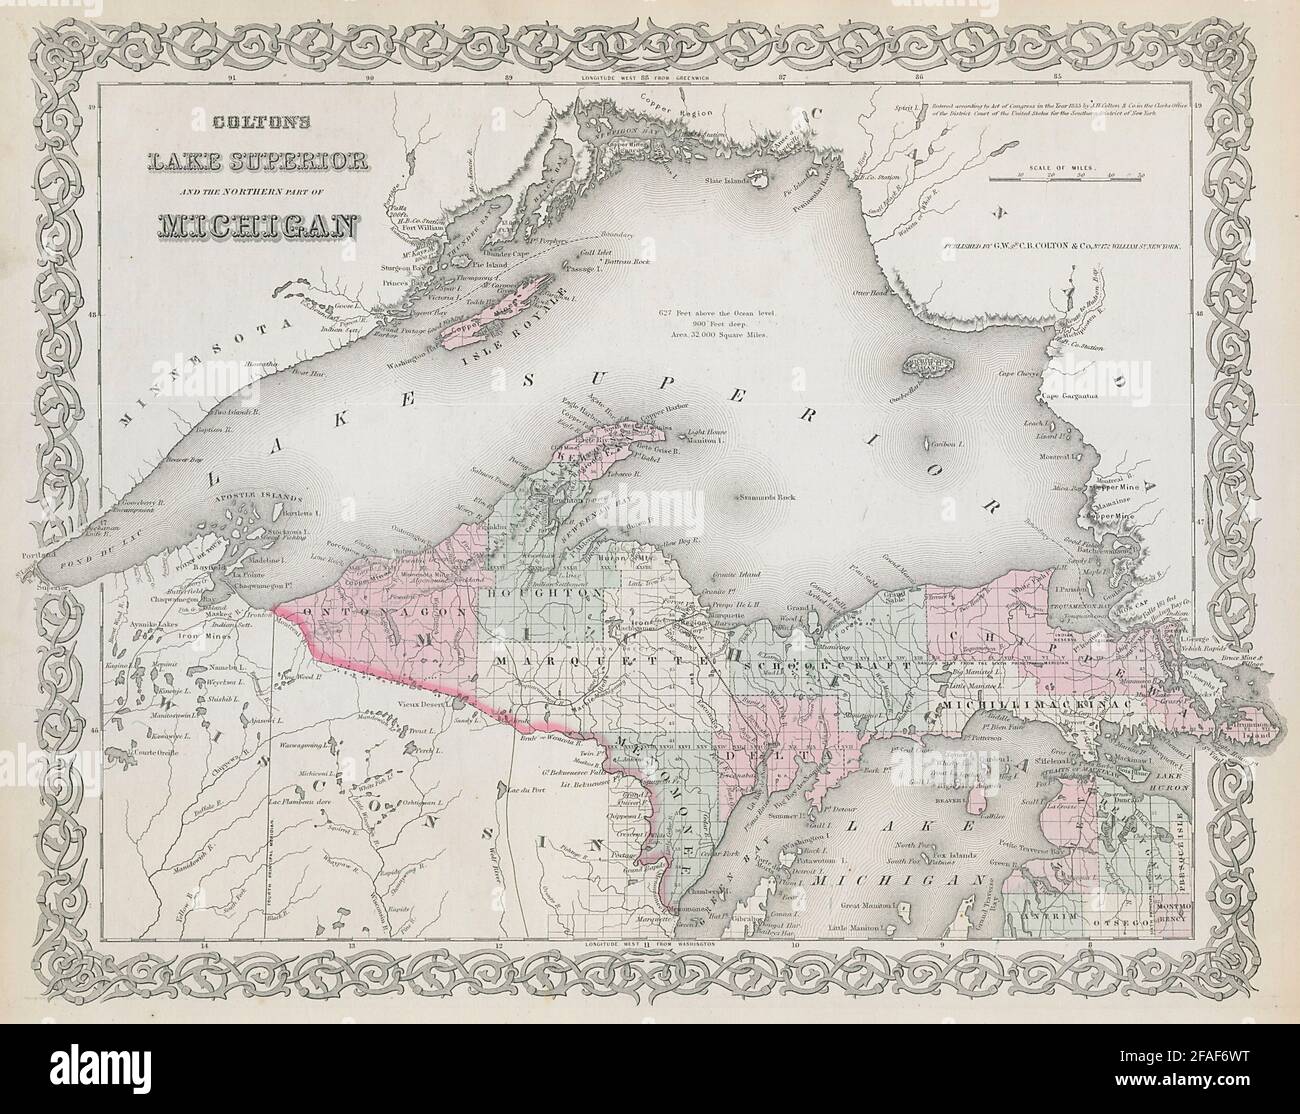 Colton's Lake Superior and the northern part of Michigan. US state map 1869 Stock Photo